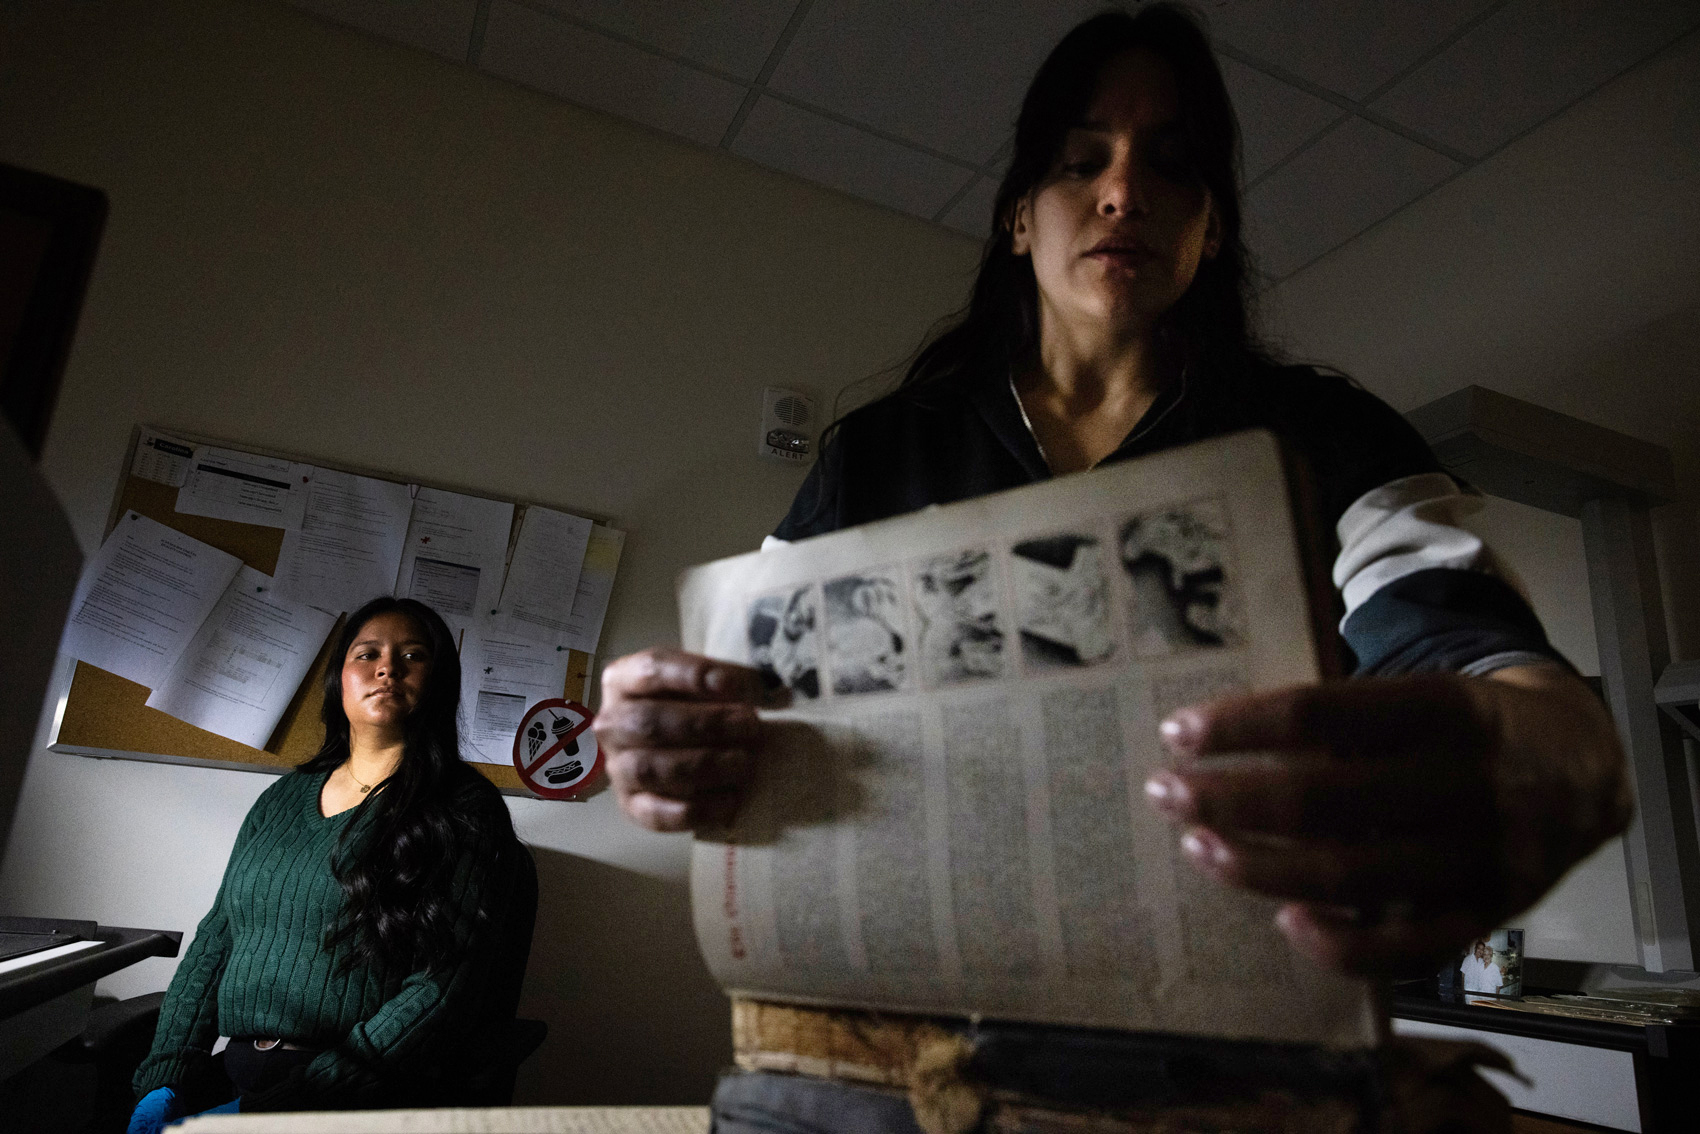 Perla Ortiz, graduate research assistant, at left, watches as Mikaela Selley, archivist and program manager, goes through a family bible donated by A. John Castillo at Arte Público Press,